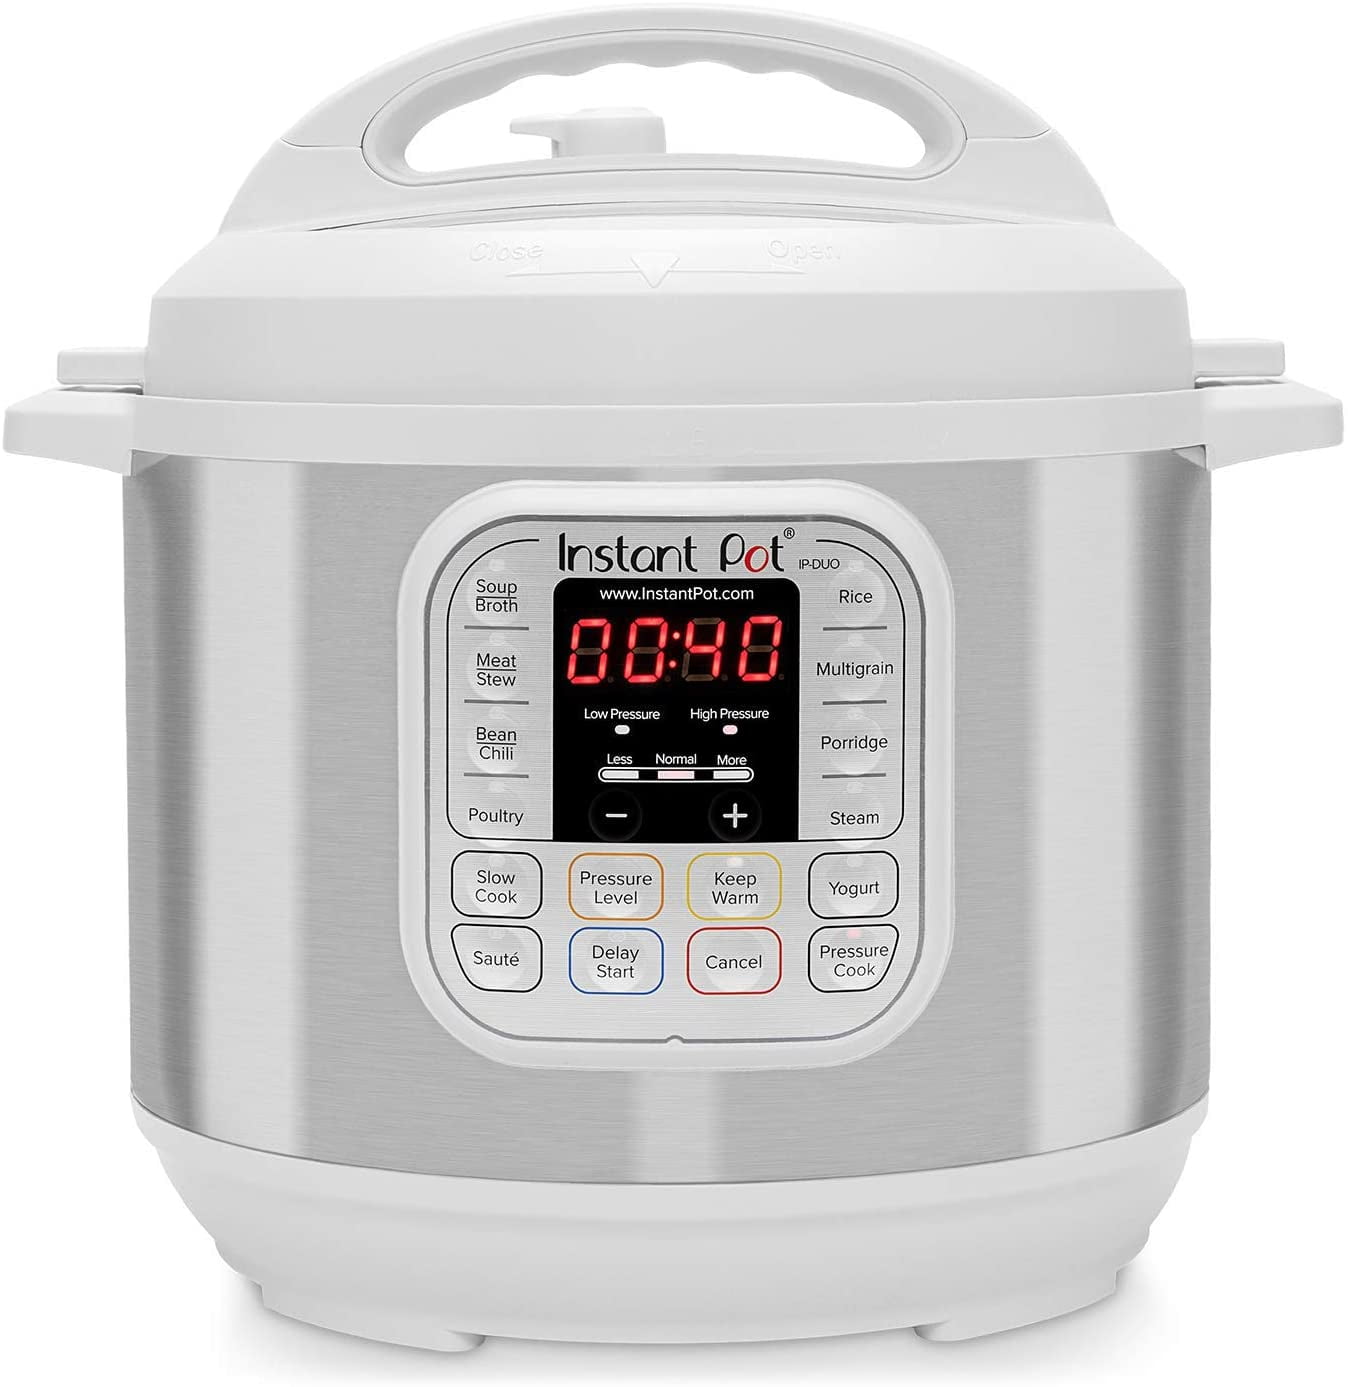 $79.99 - Instant Pot 6 Quart Duo 7-in-1 Electric Pressure Cooker -  Stainless Steel/Black – Môdern Space Gallery